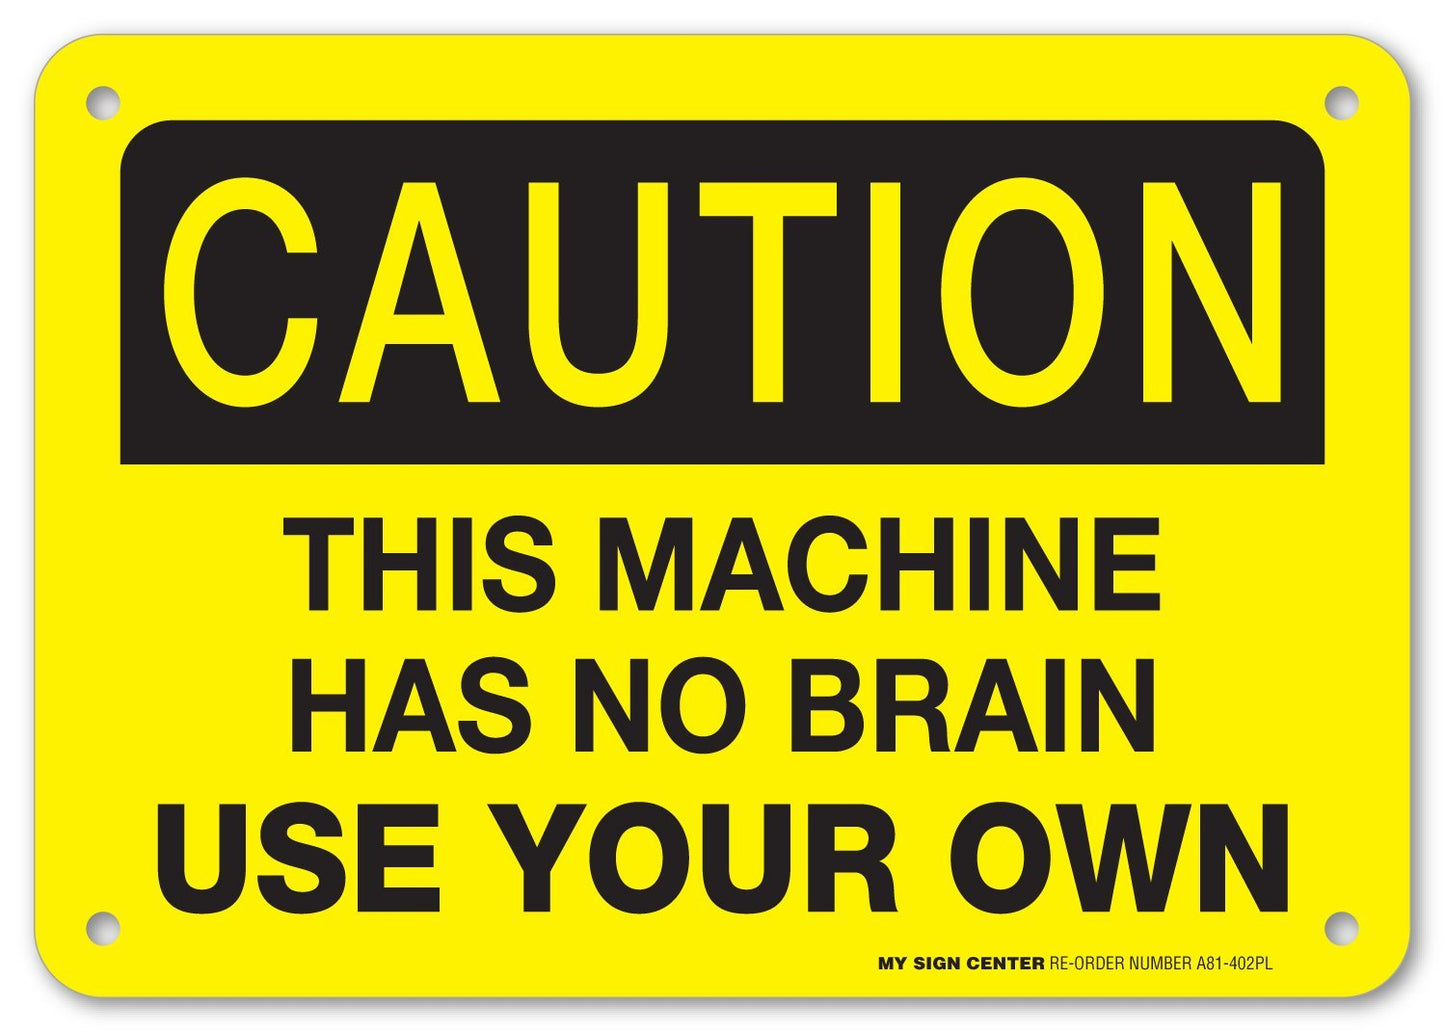 Caution This Machine Has No Brain Use Your Own Sign